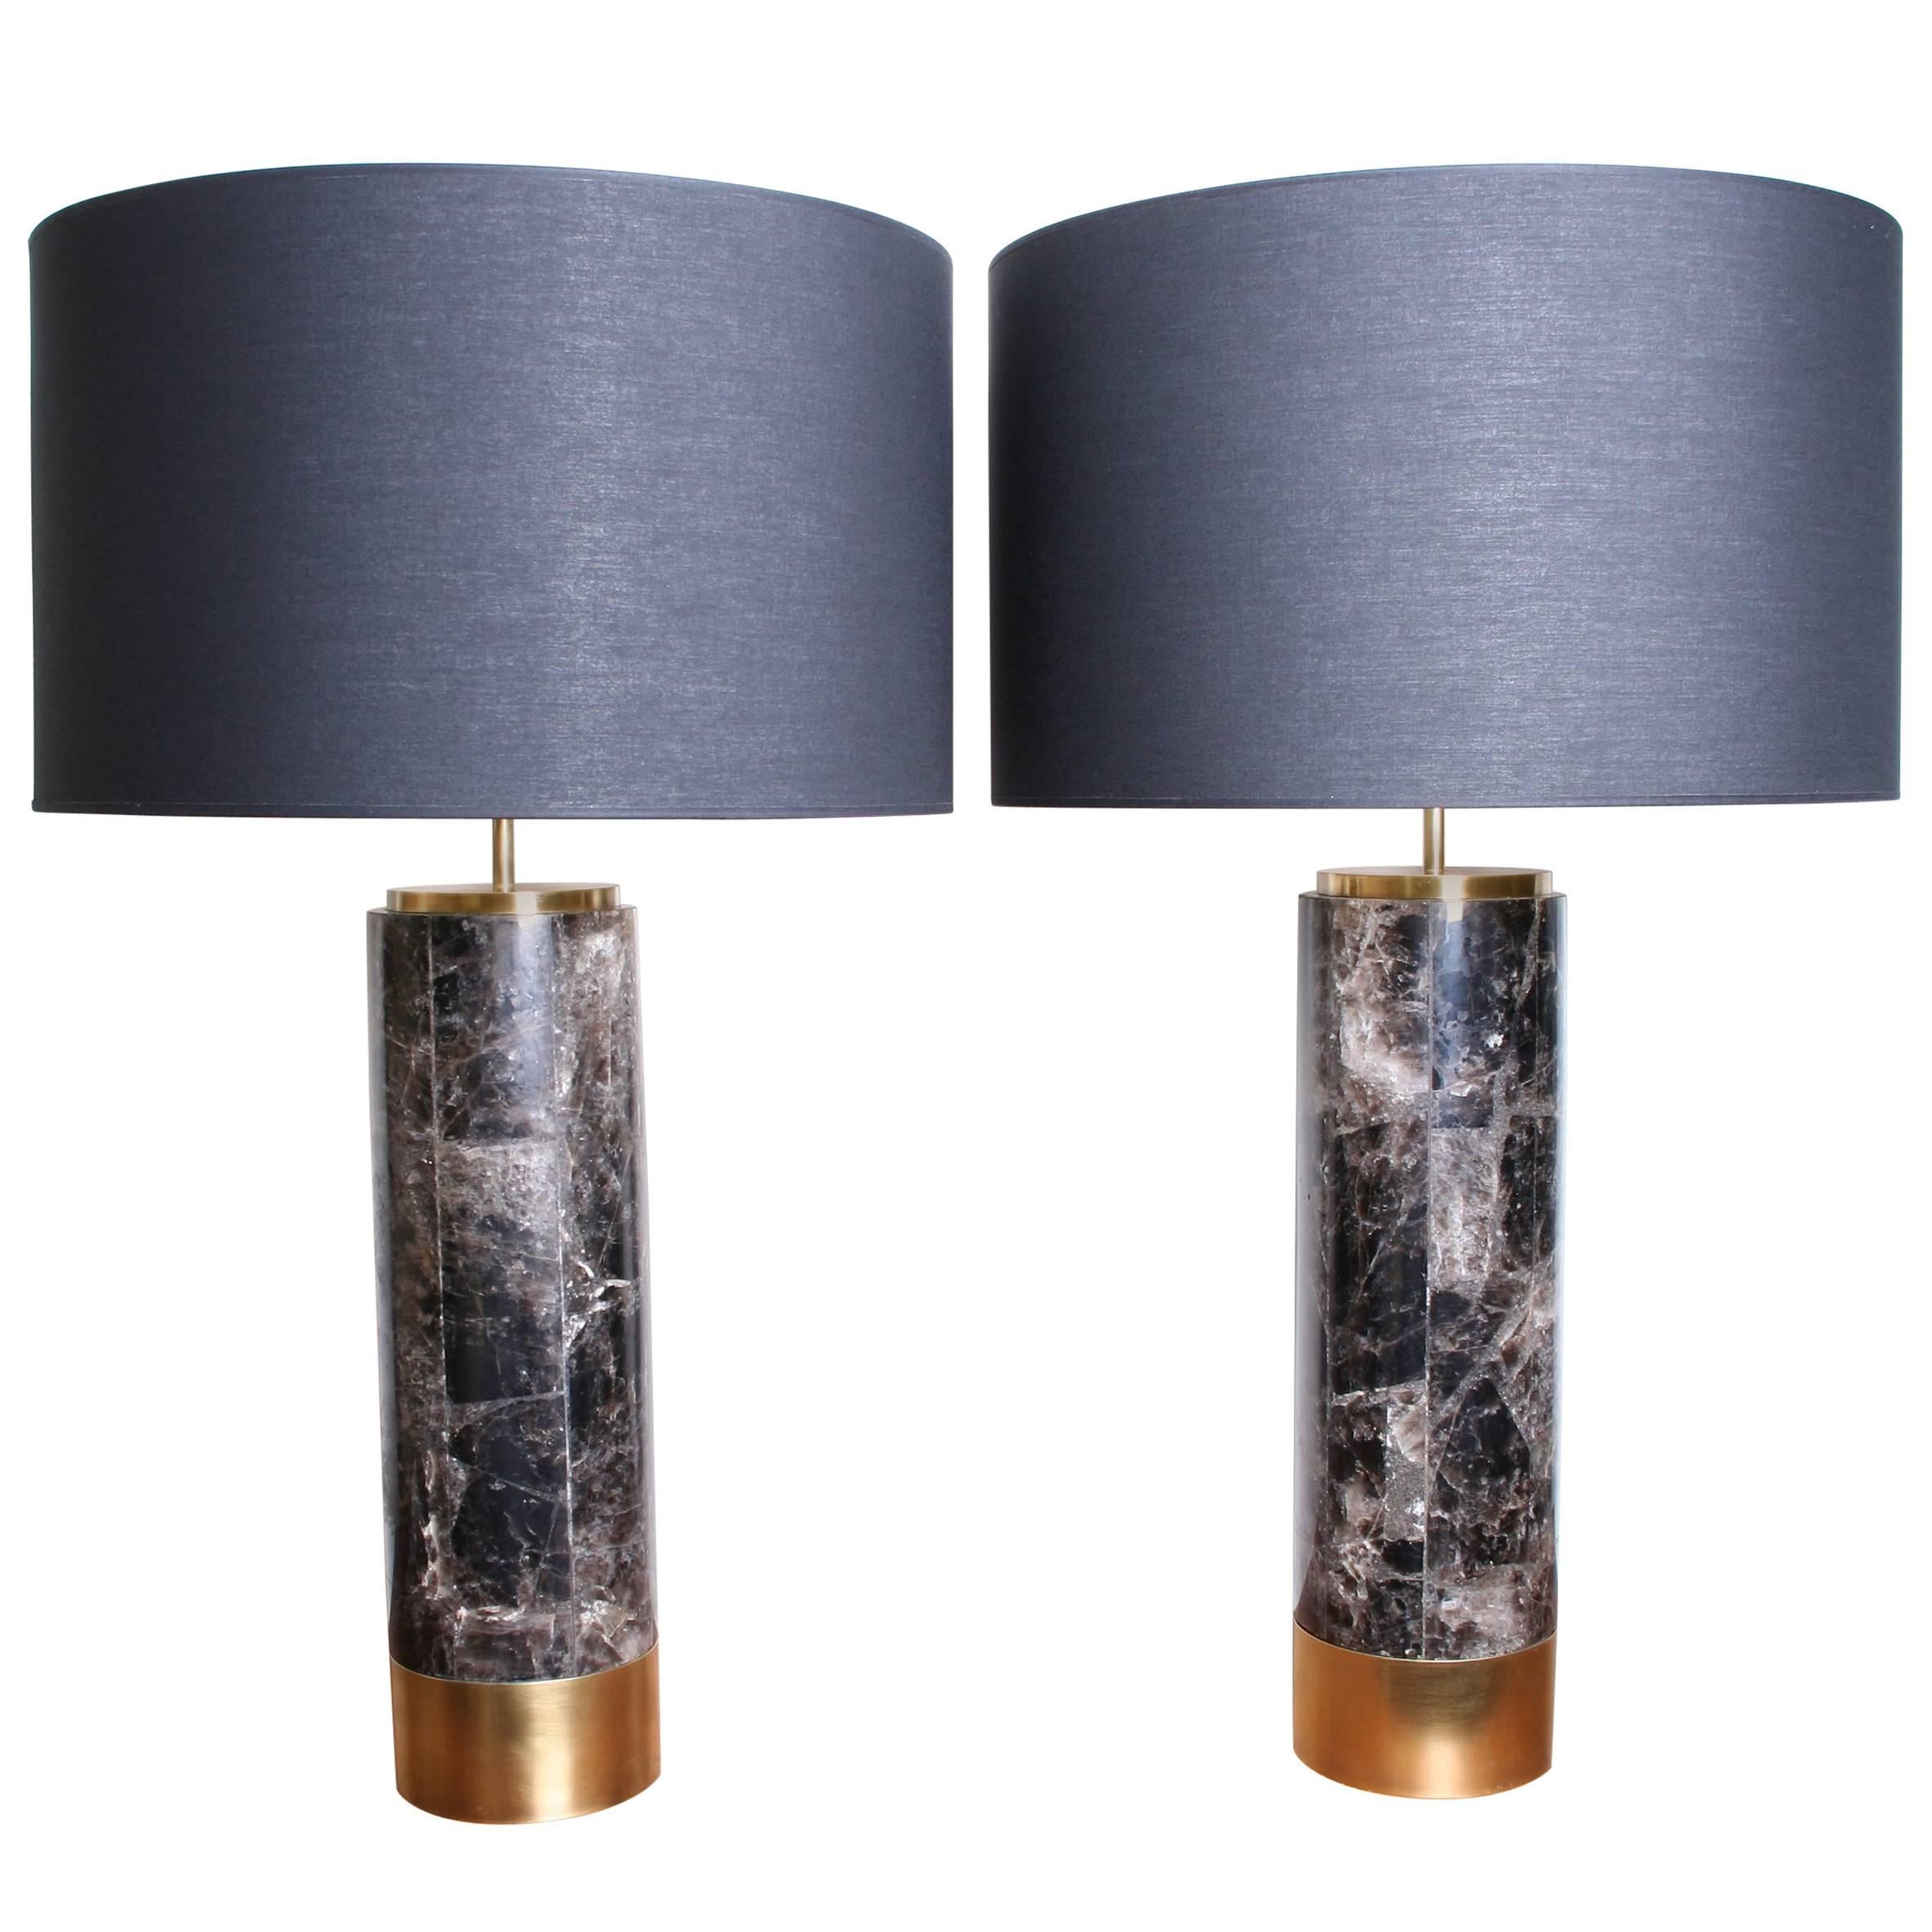 Pair of Table Lamps in Smokey Quartz and Brass, Model Kristalia by Arriau For Sale